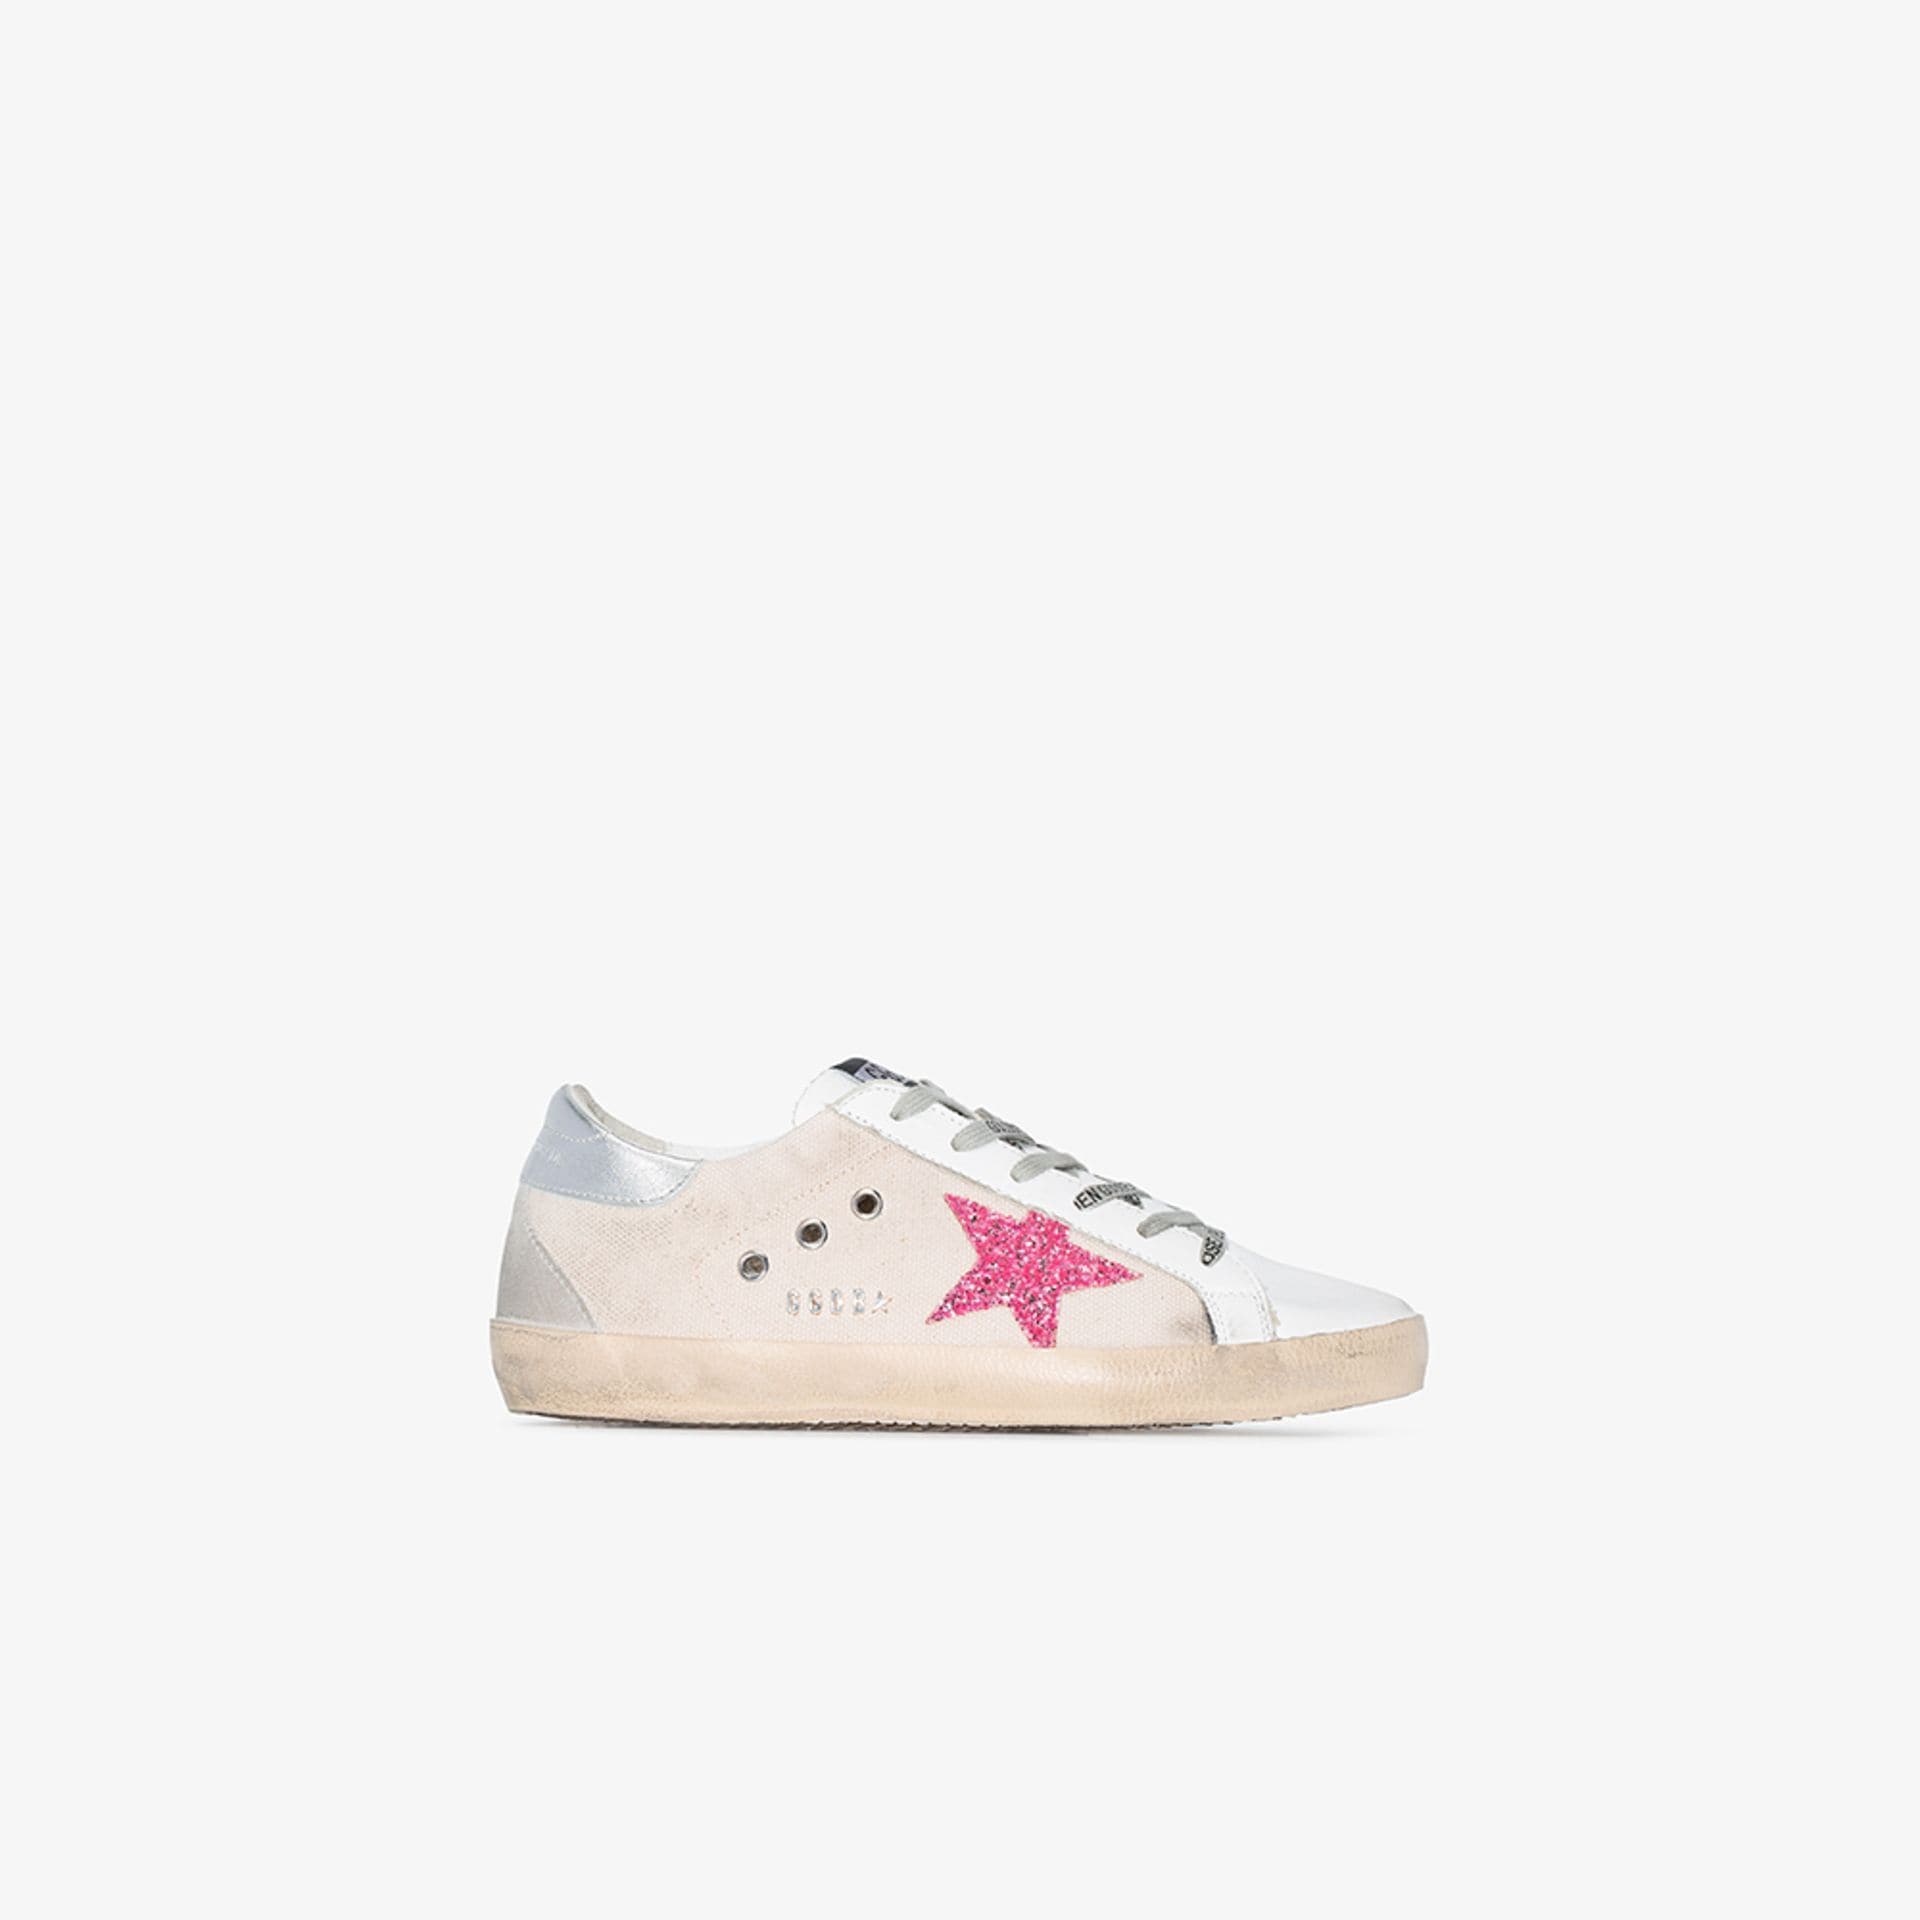 Golden Goose White and pink Superstar 